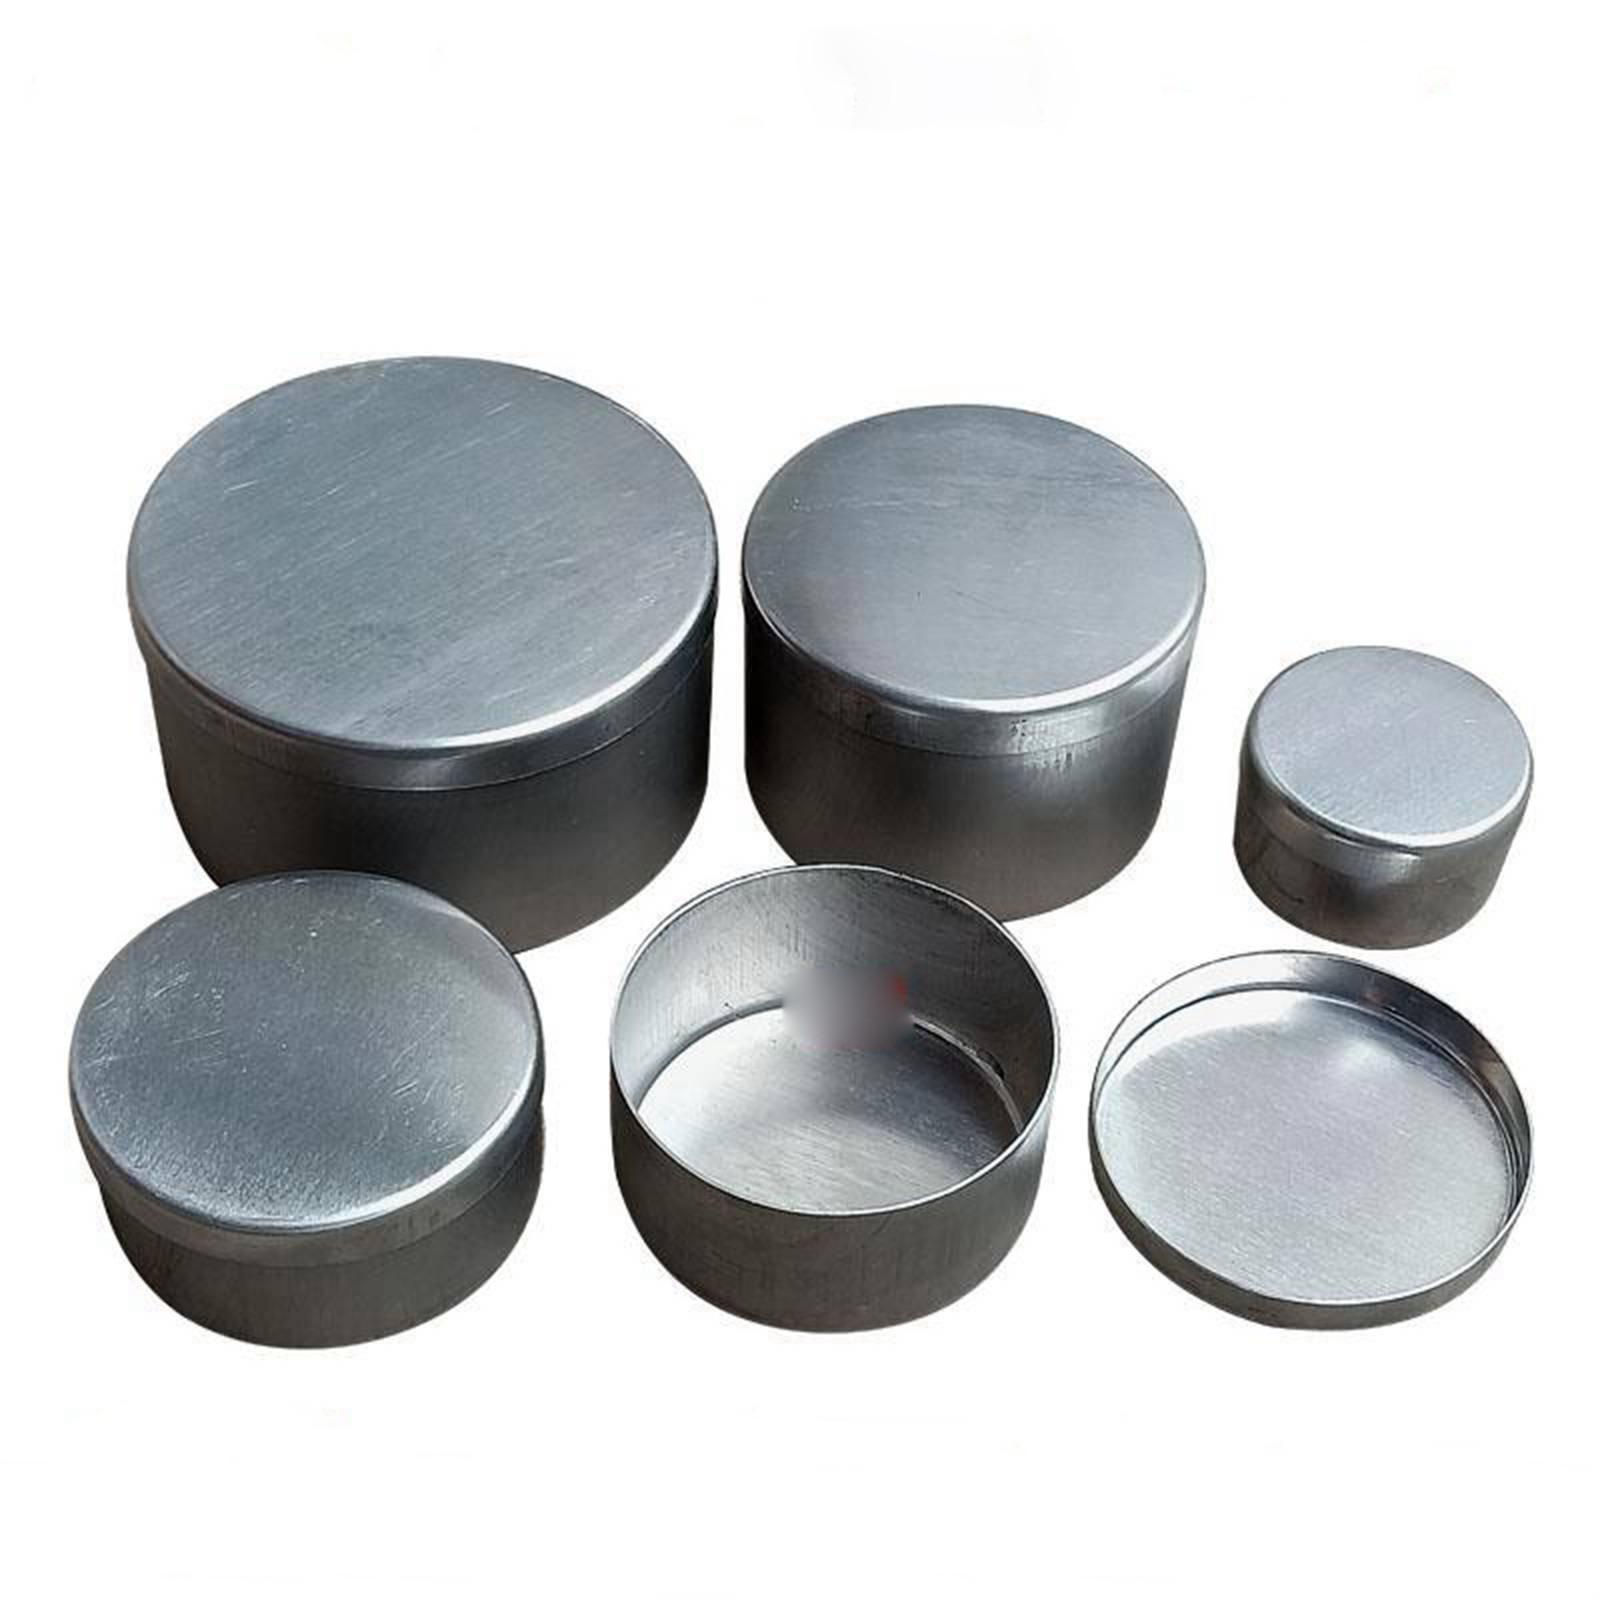 Aluminium O D 40mm To 100mm Height 25mm To 55mm Soil Weighing And Moisture Measuring Box